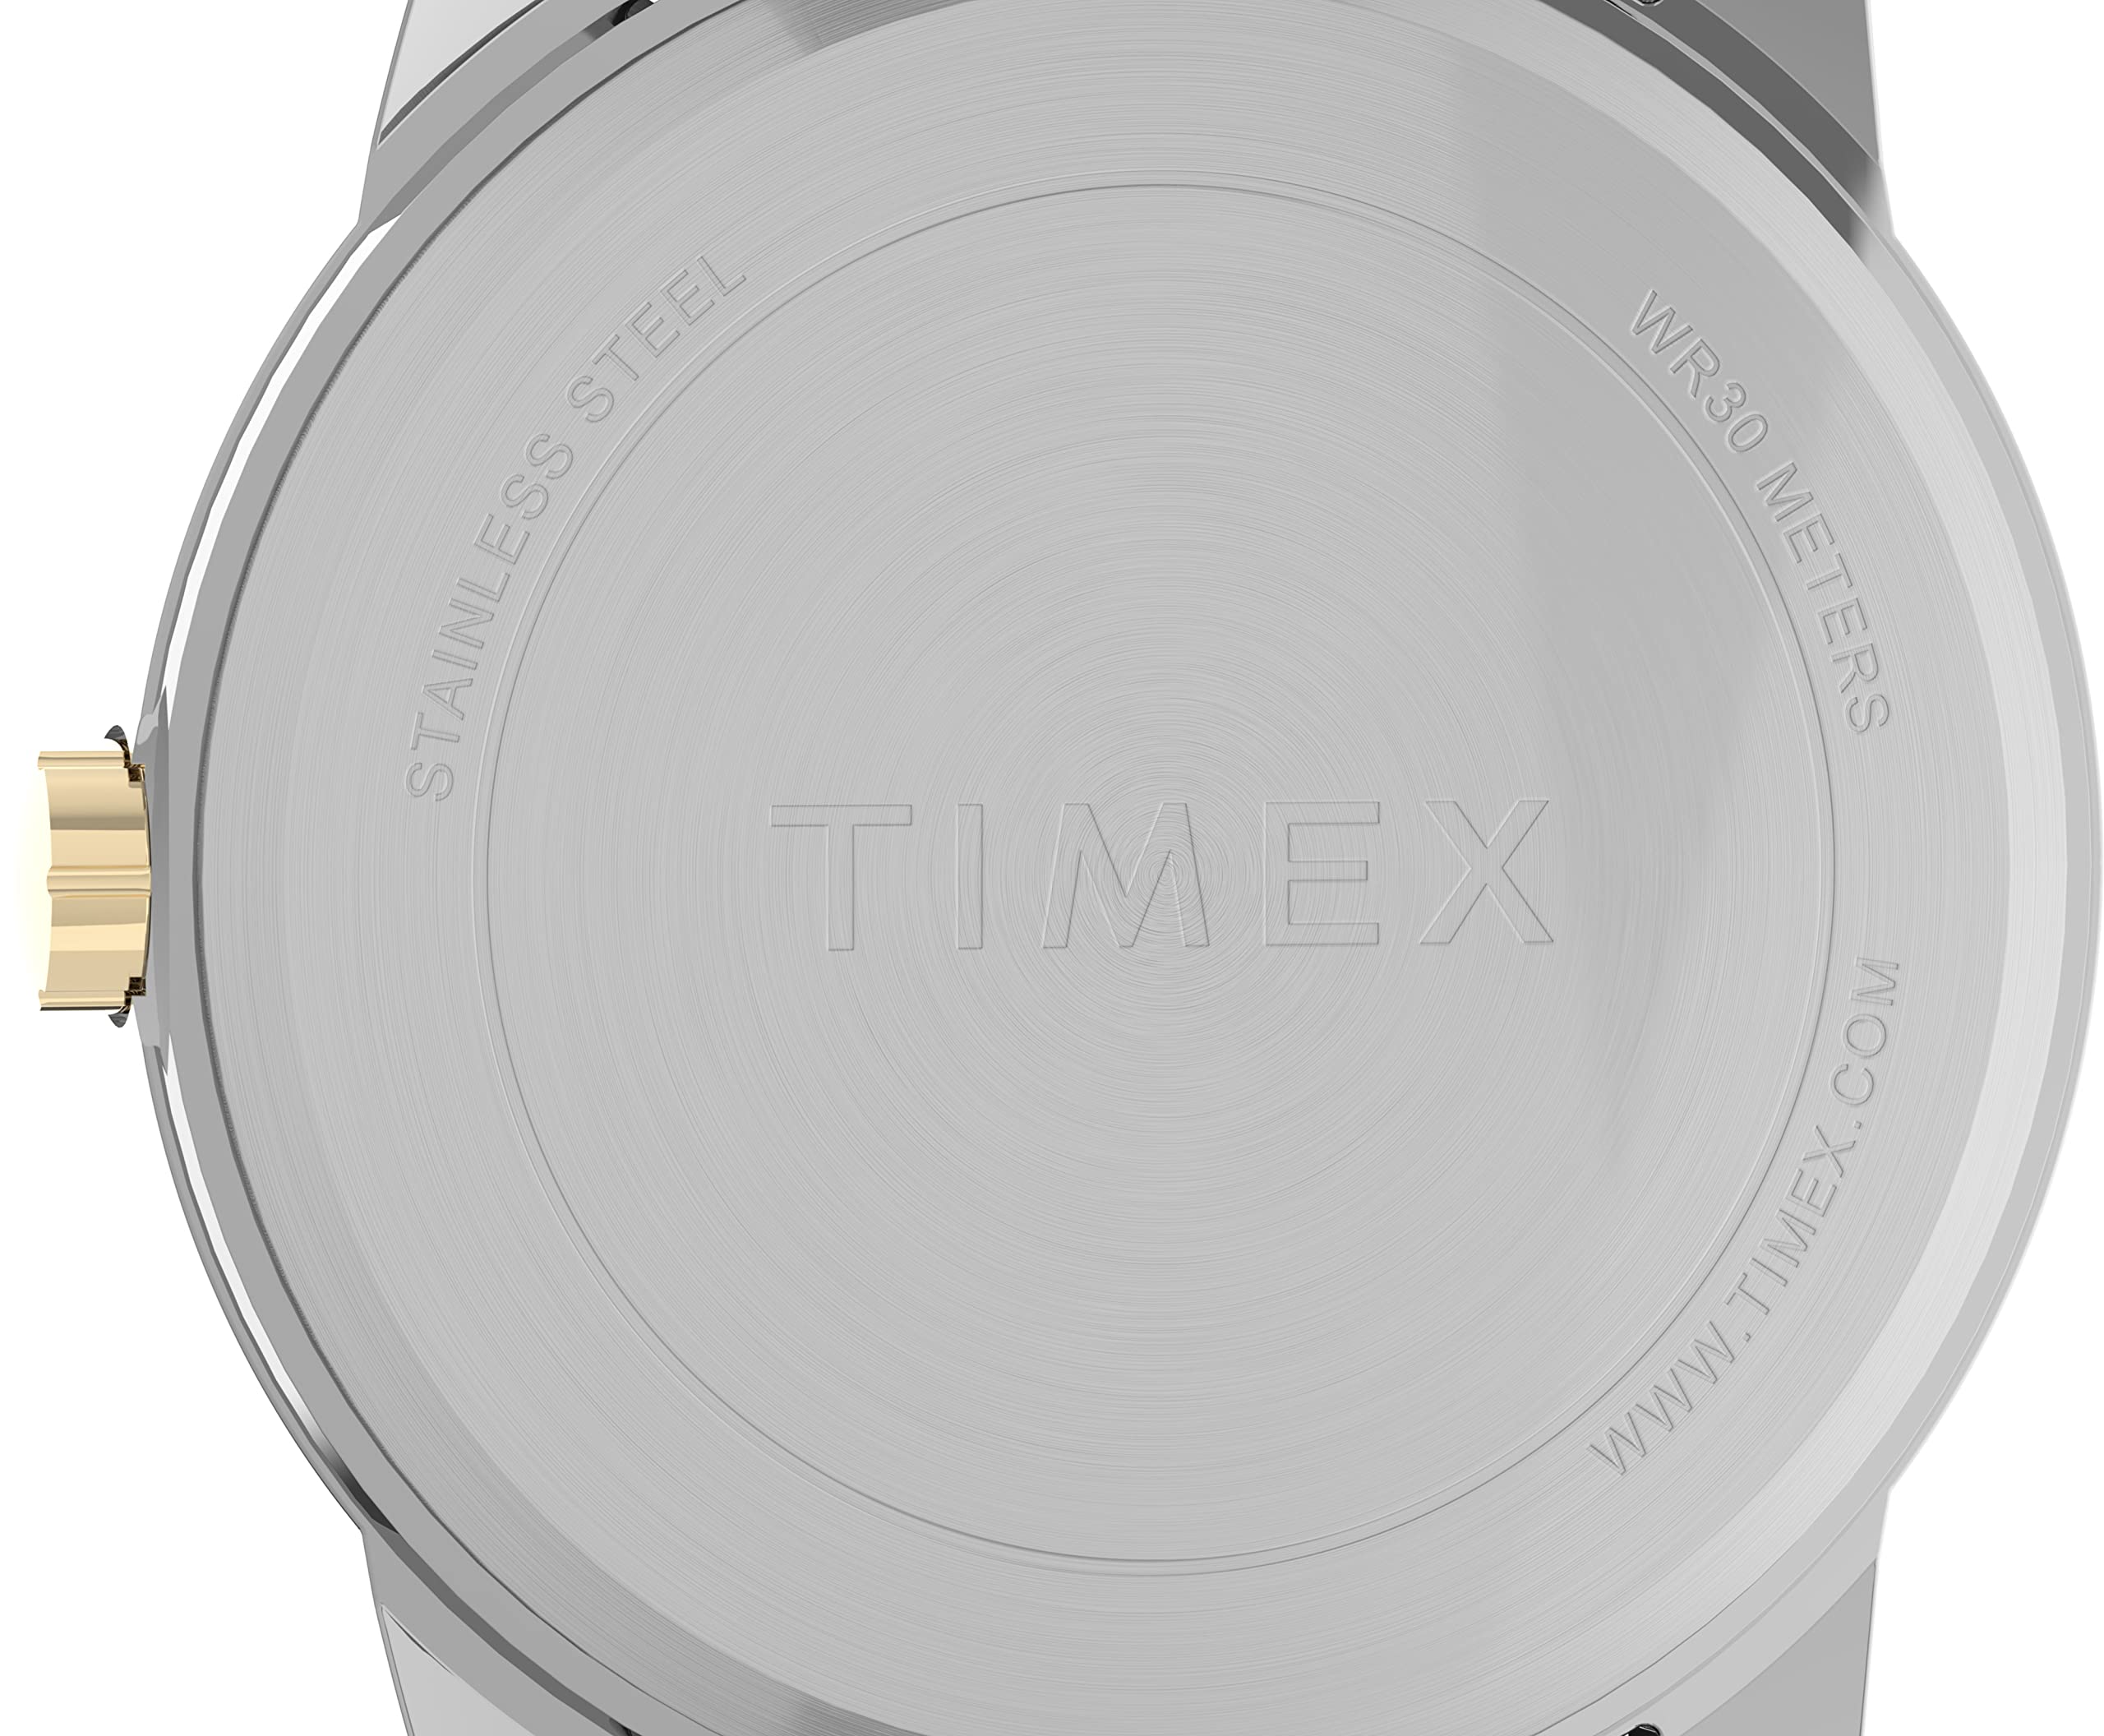 Timex Men's Easy Reader 38mm Perfect Fit Watch – Two-Tone Case White Dial with Two-Tone Expansion Band